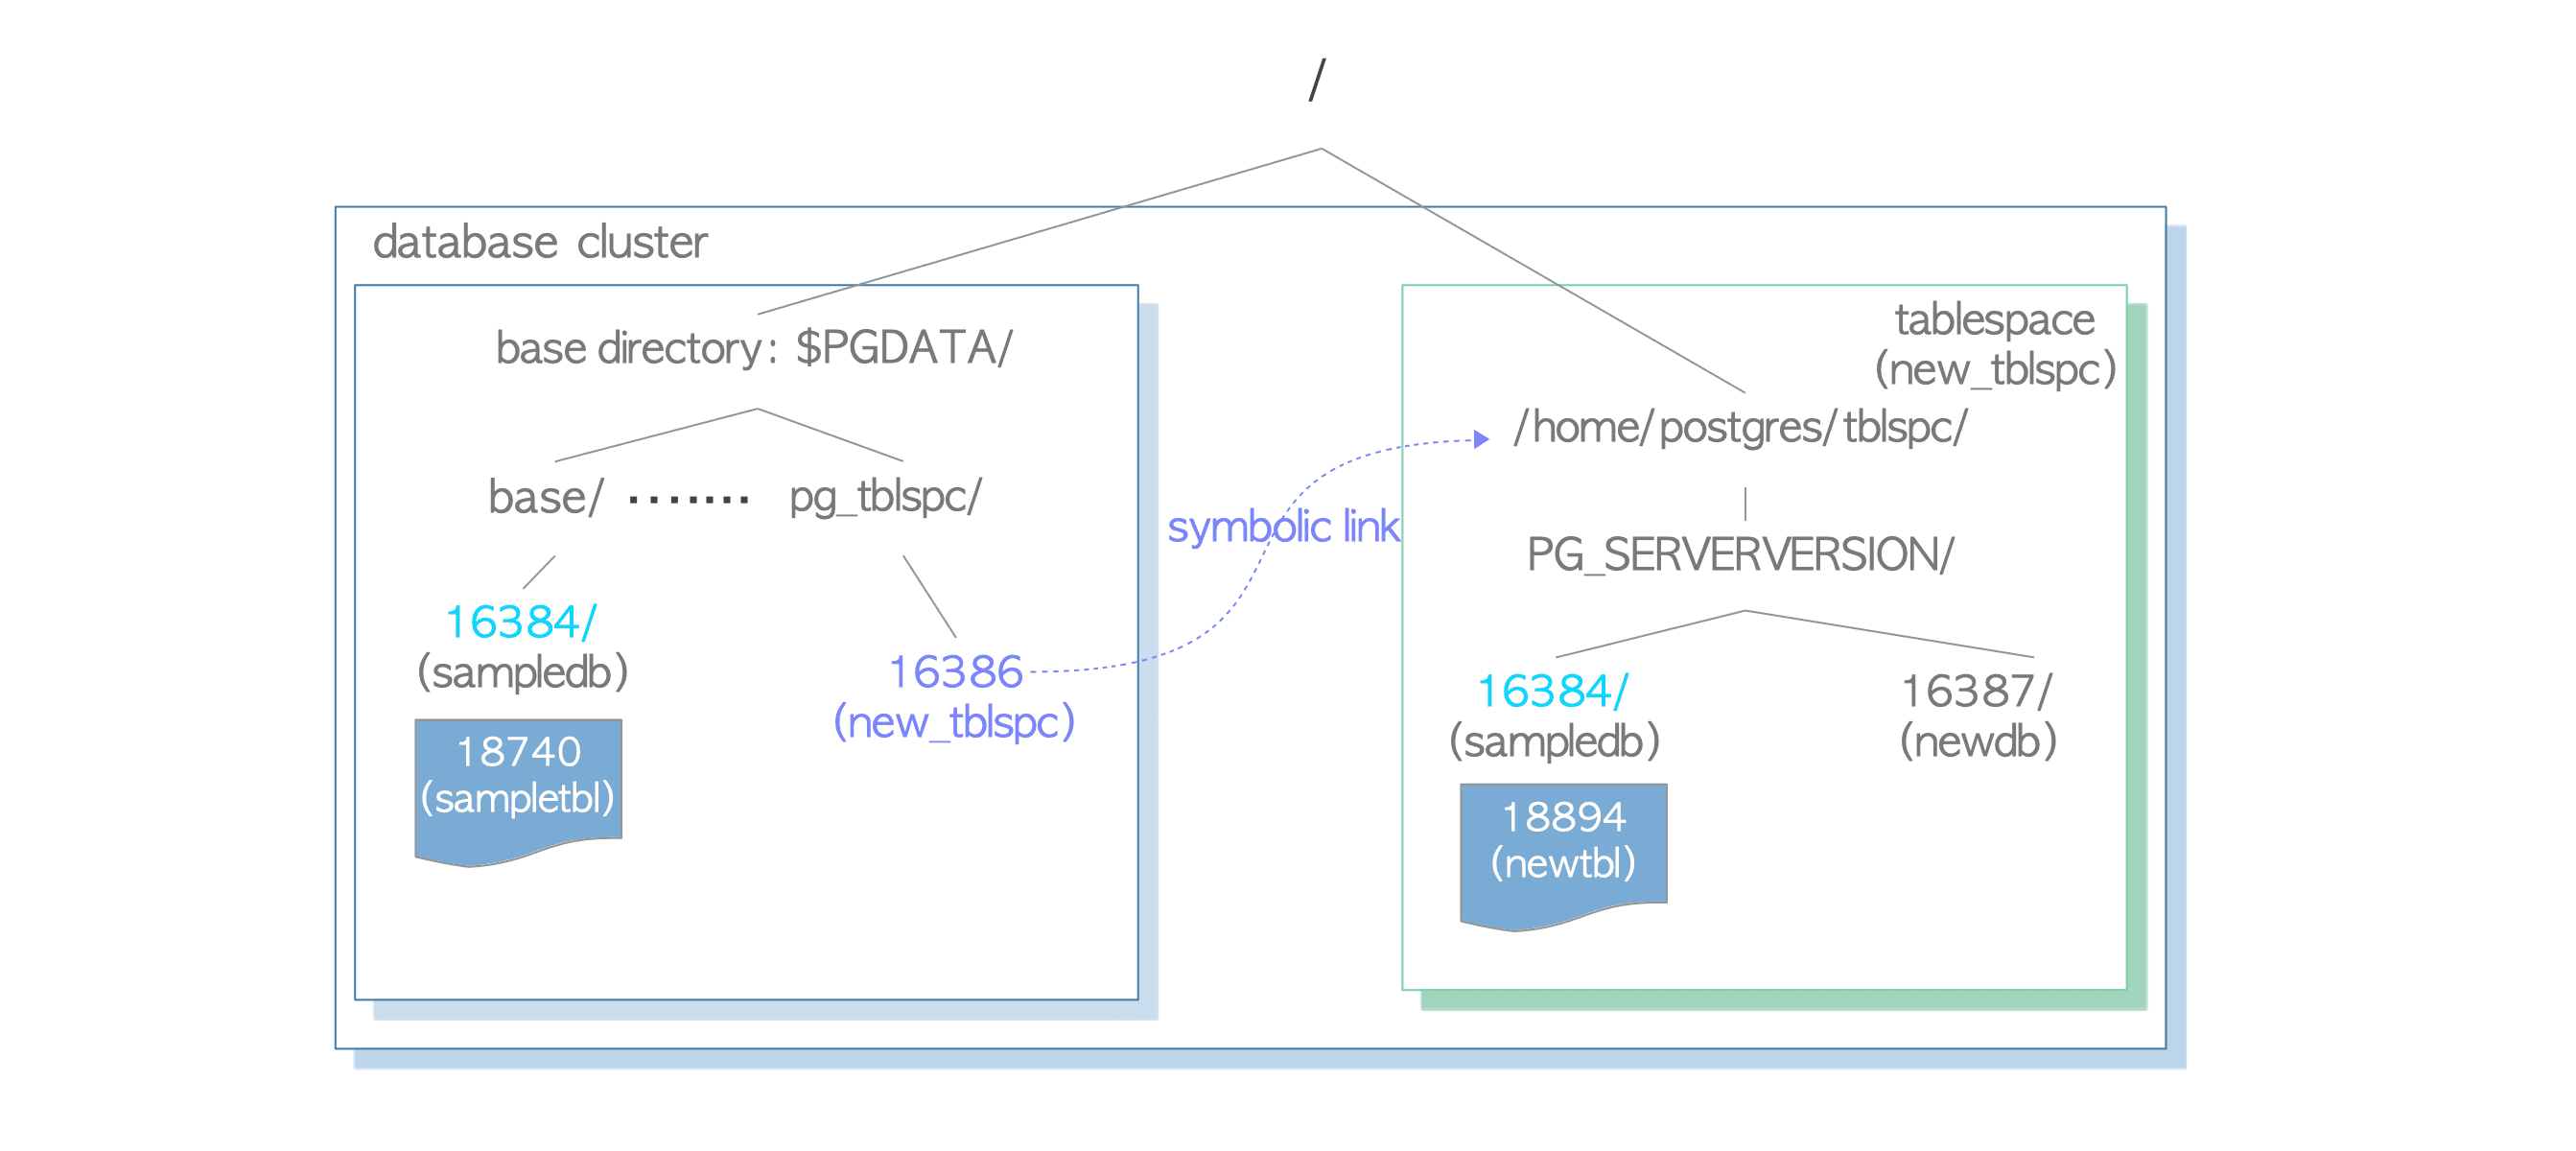 Fig. 1.3. A Tablespace in the Database Cluster.